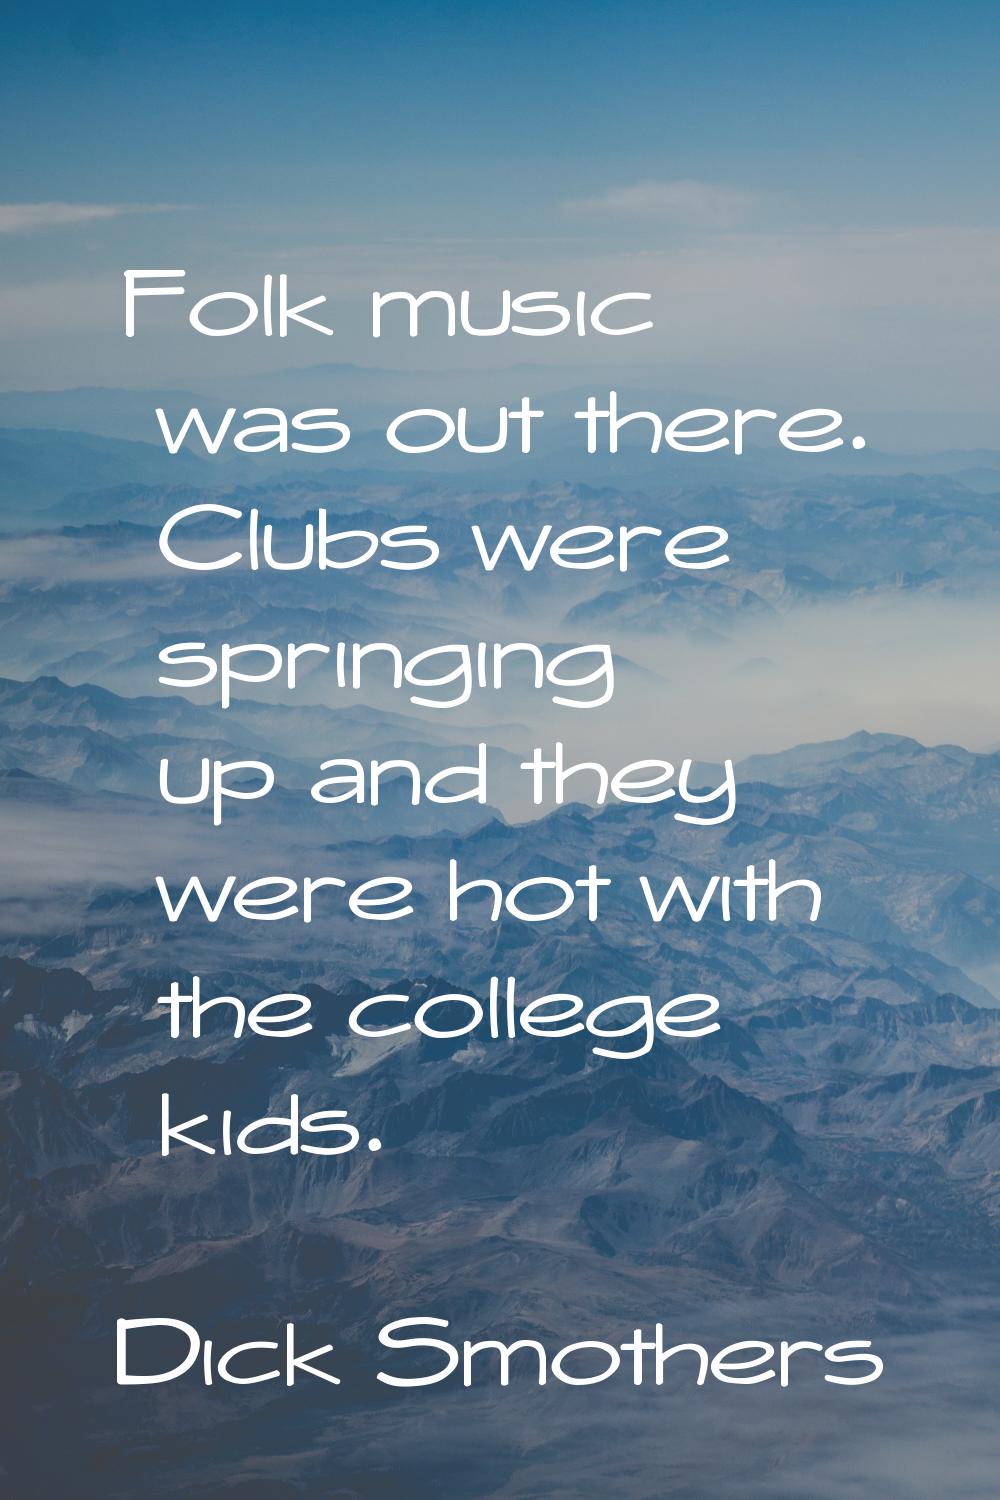 Folk music was out there. Clubs were springing up and they were hot with the college kids.